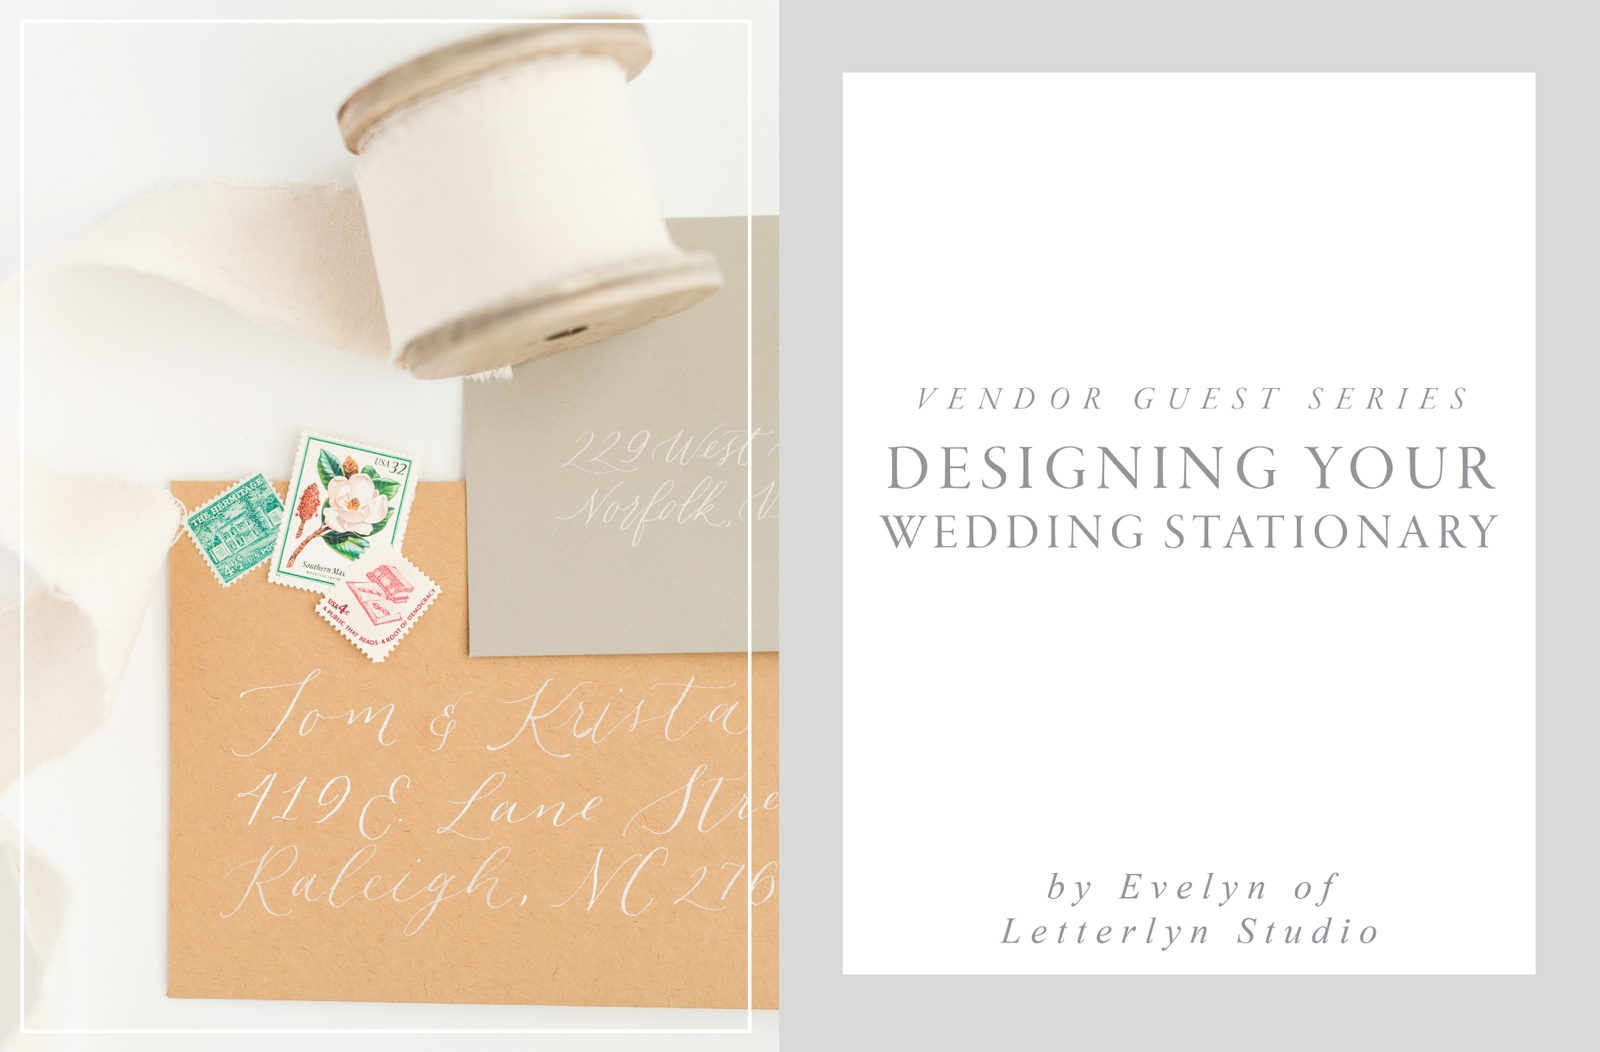 tips-for-designing-your-wedding-stationary-from-letterlyn-studio_3971.jpg